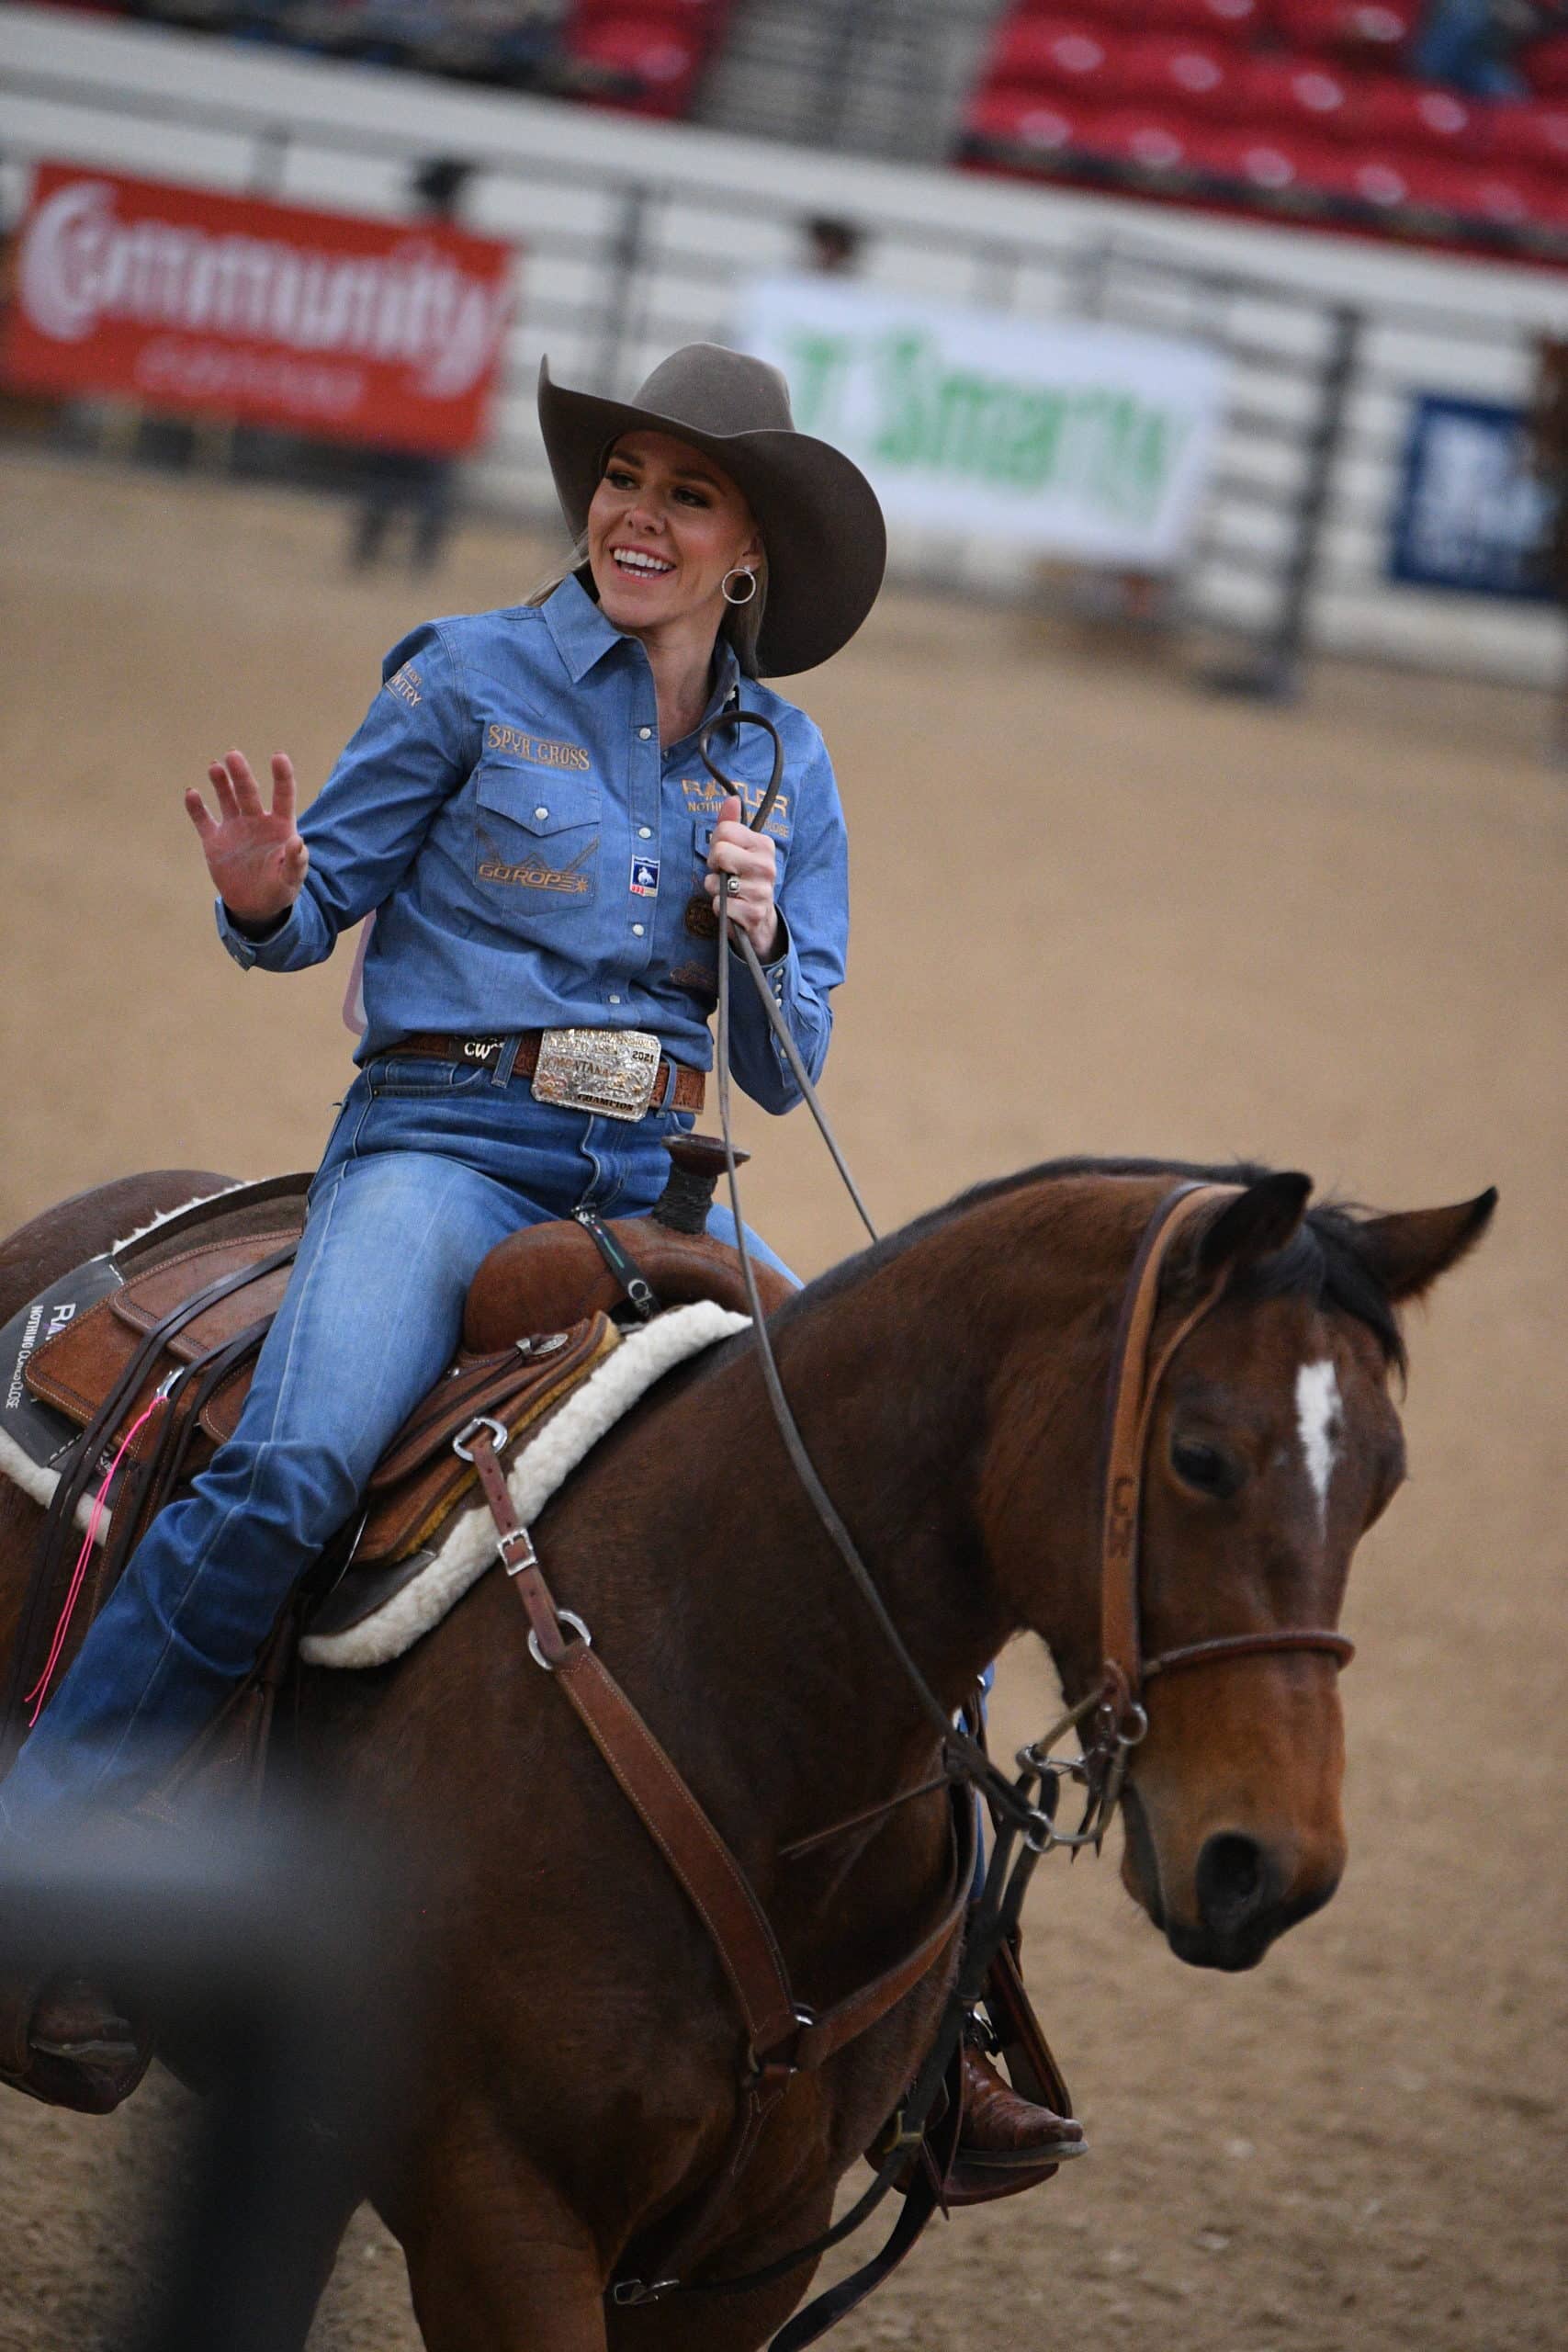 Cadee Williams smiles and waves at her daughter after clinching the NFBR breakaway roping aggregate championship in Las Vegas.